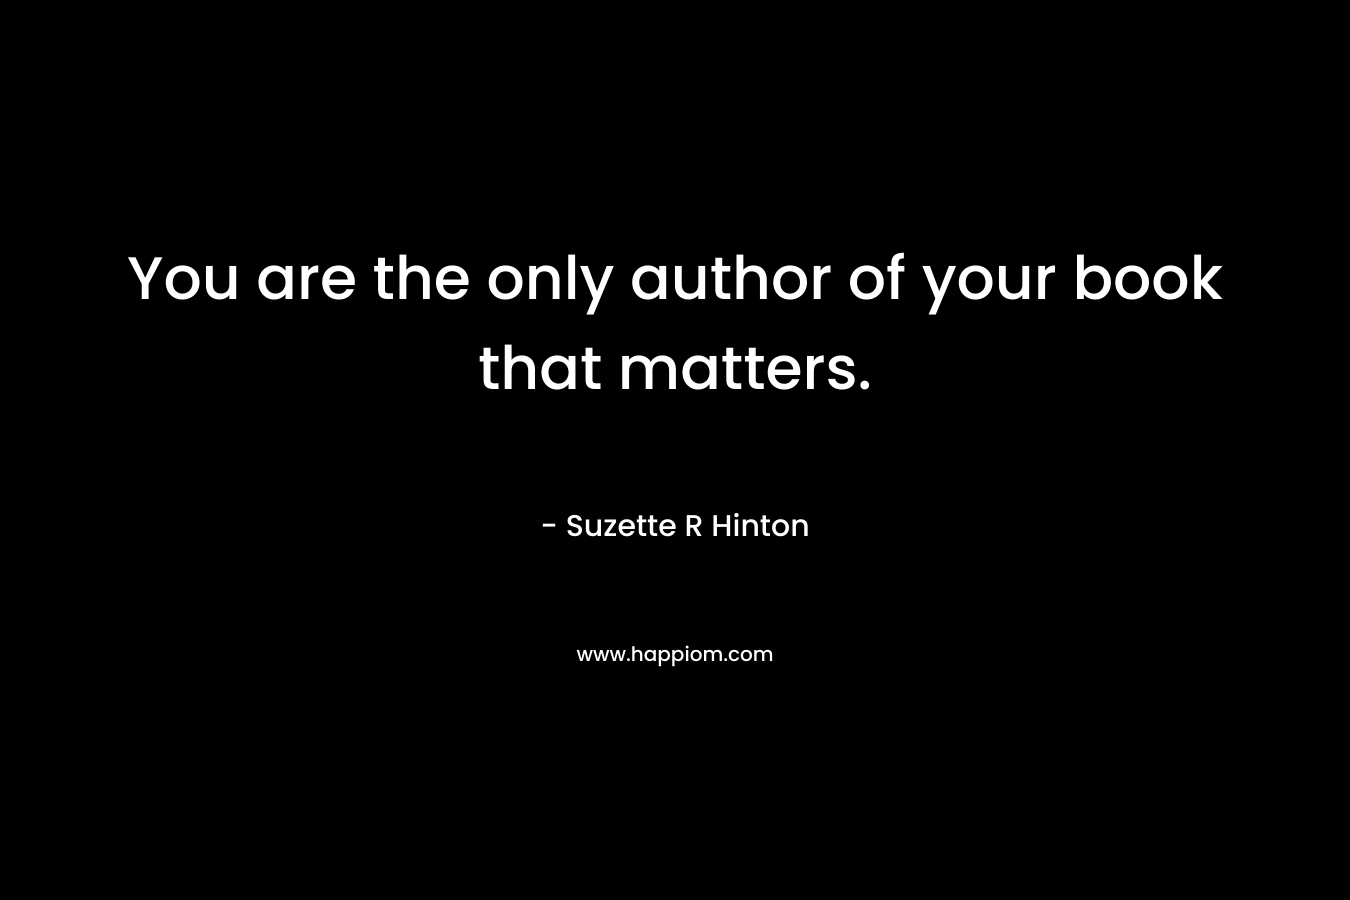 You are the only author of your book that matters.